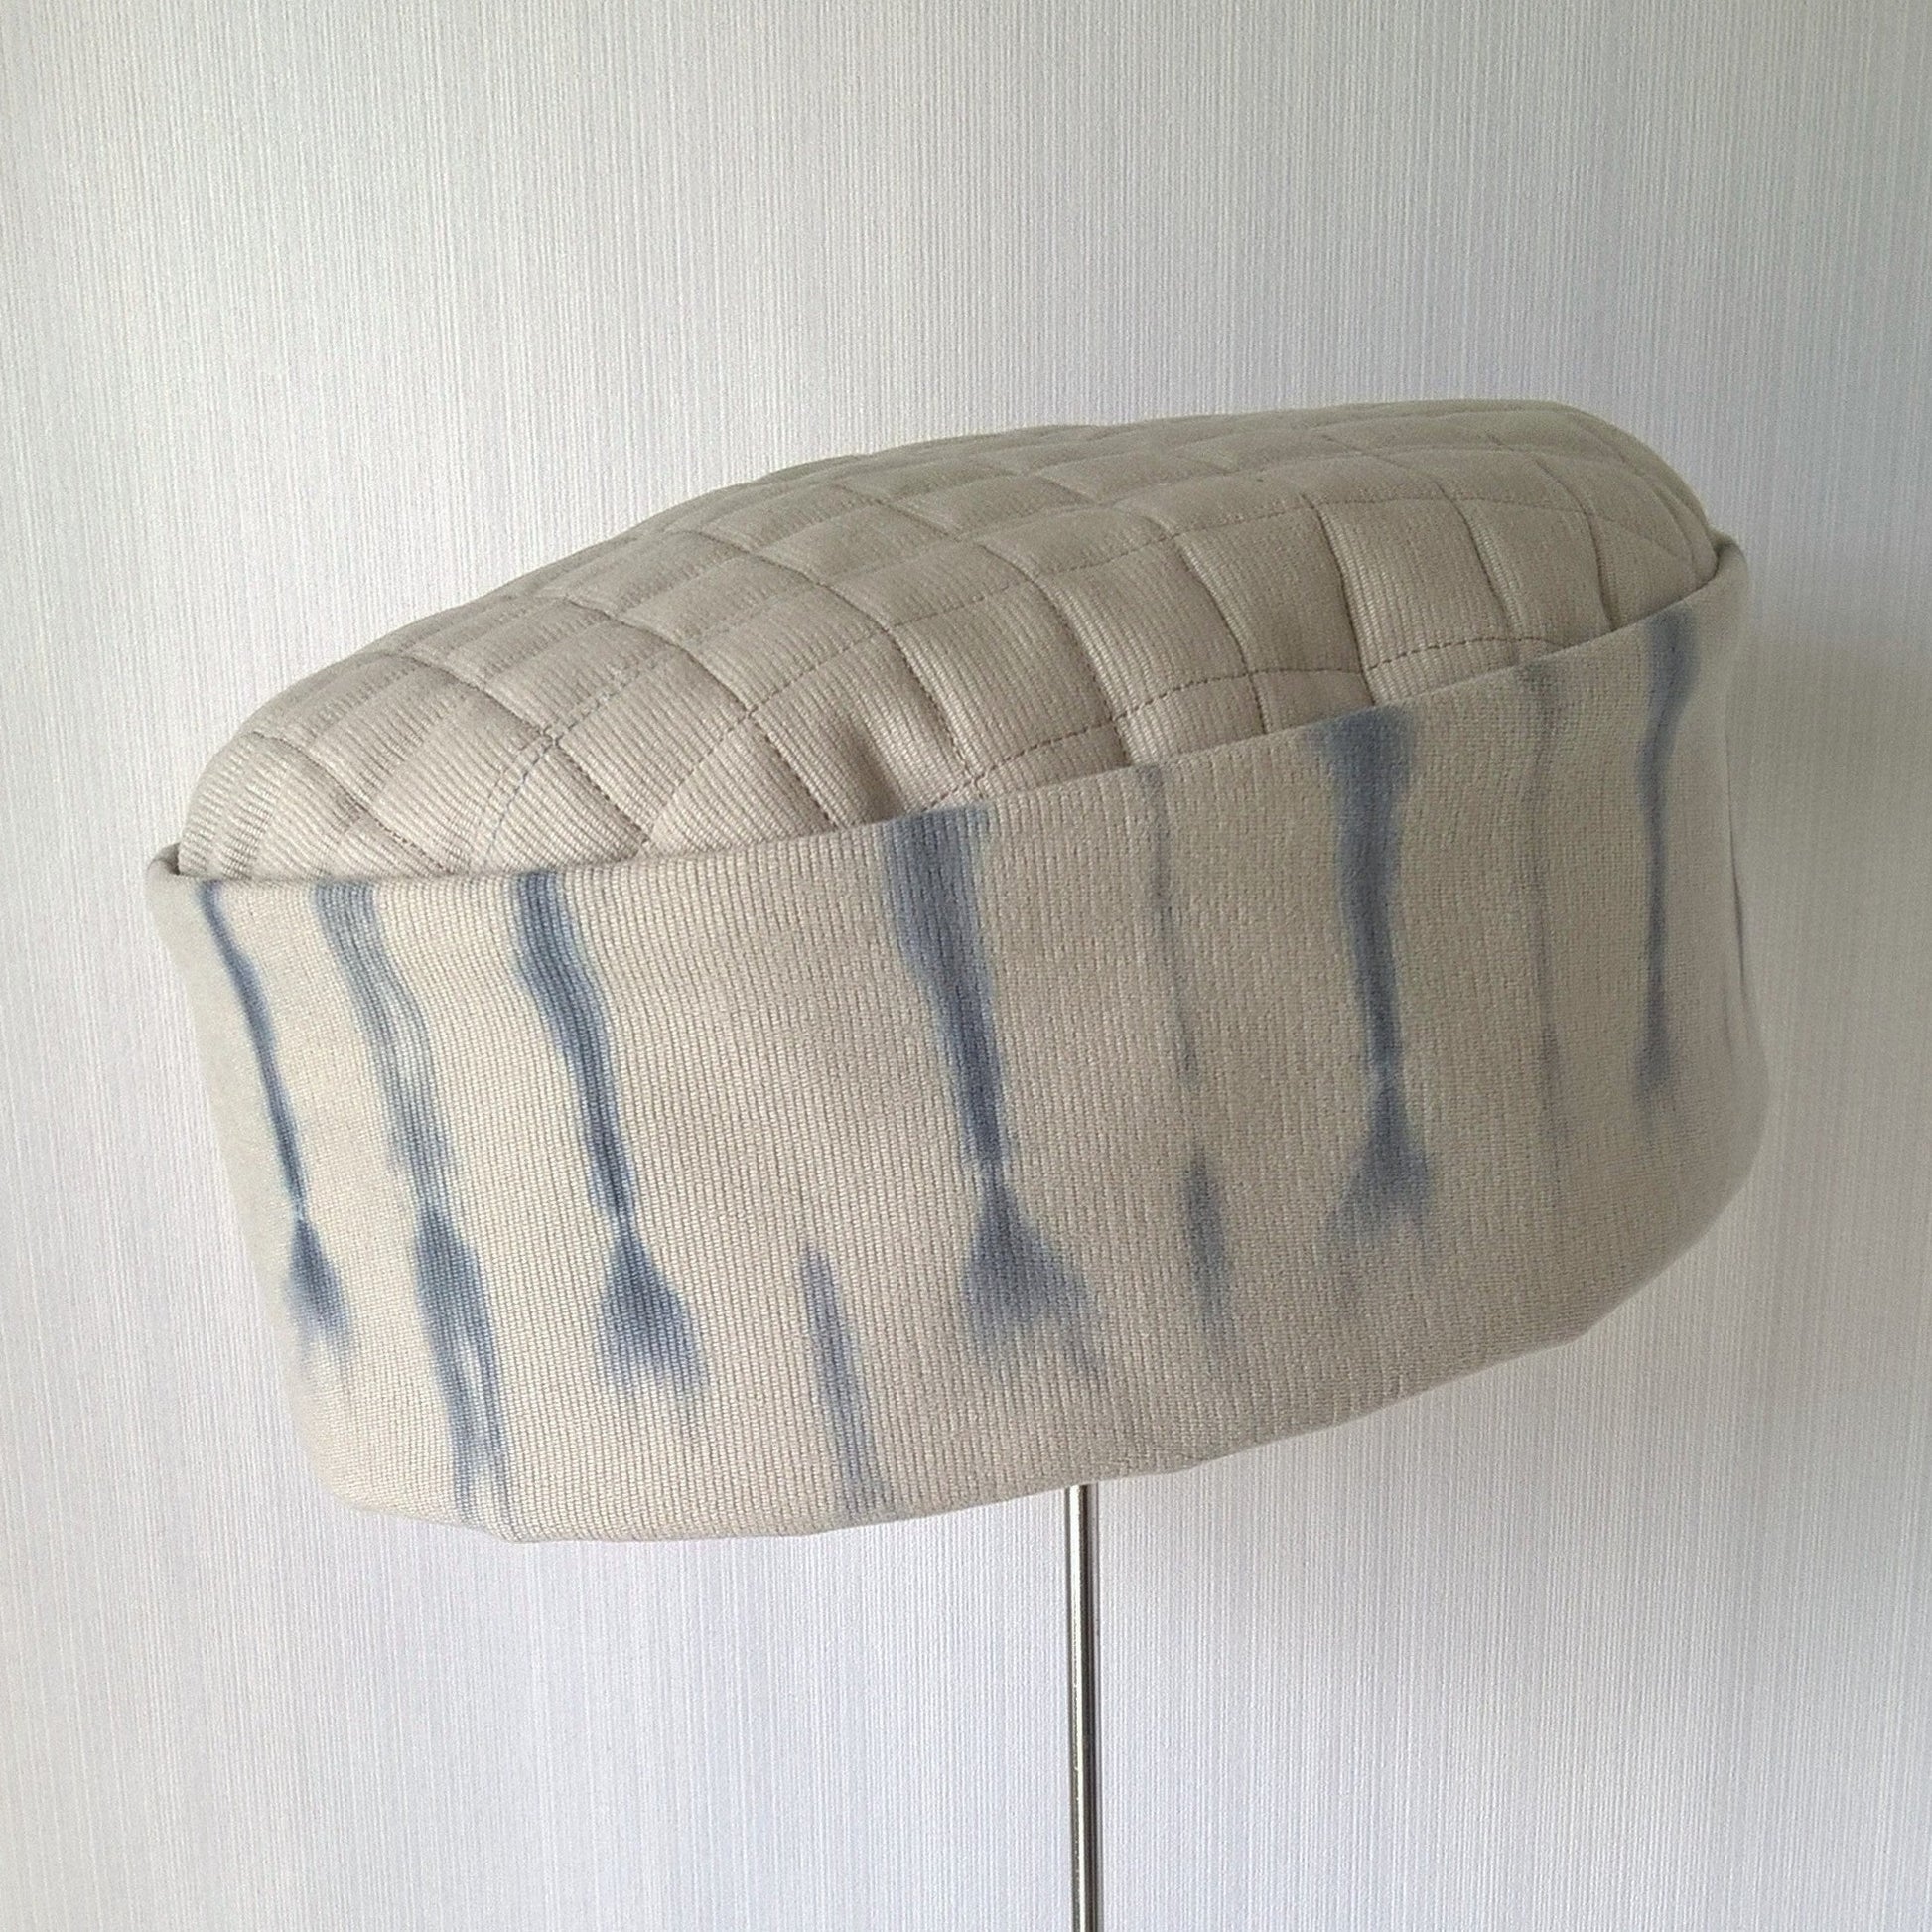 Pillbox shaped hat with tie dyed crown and quilted tip